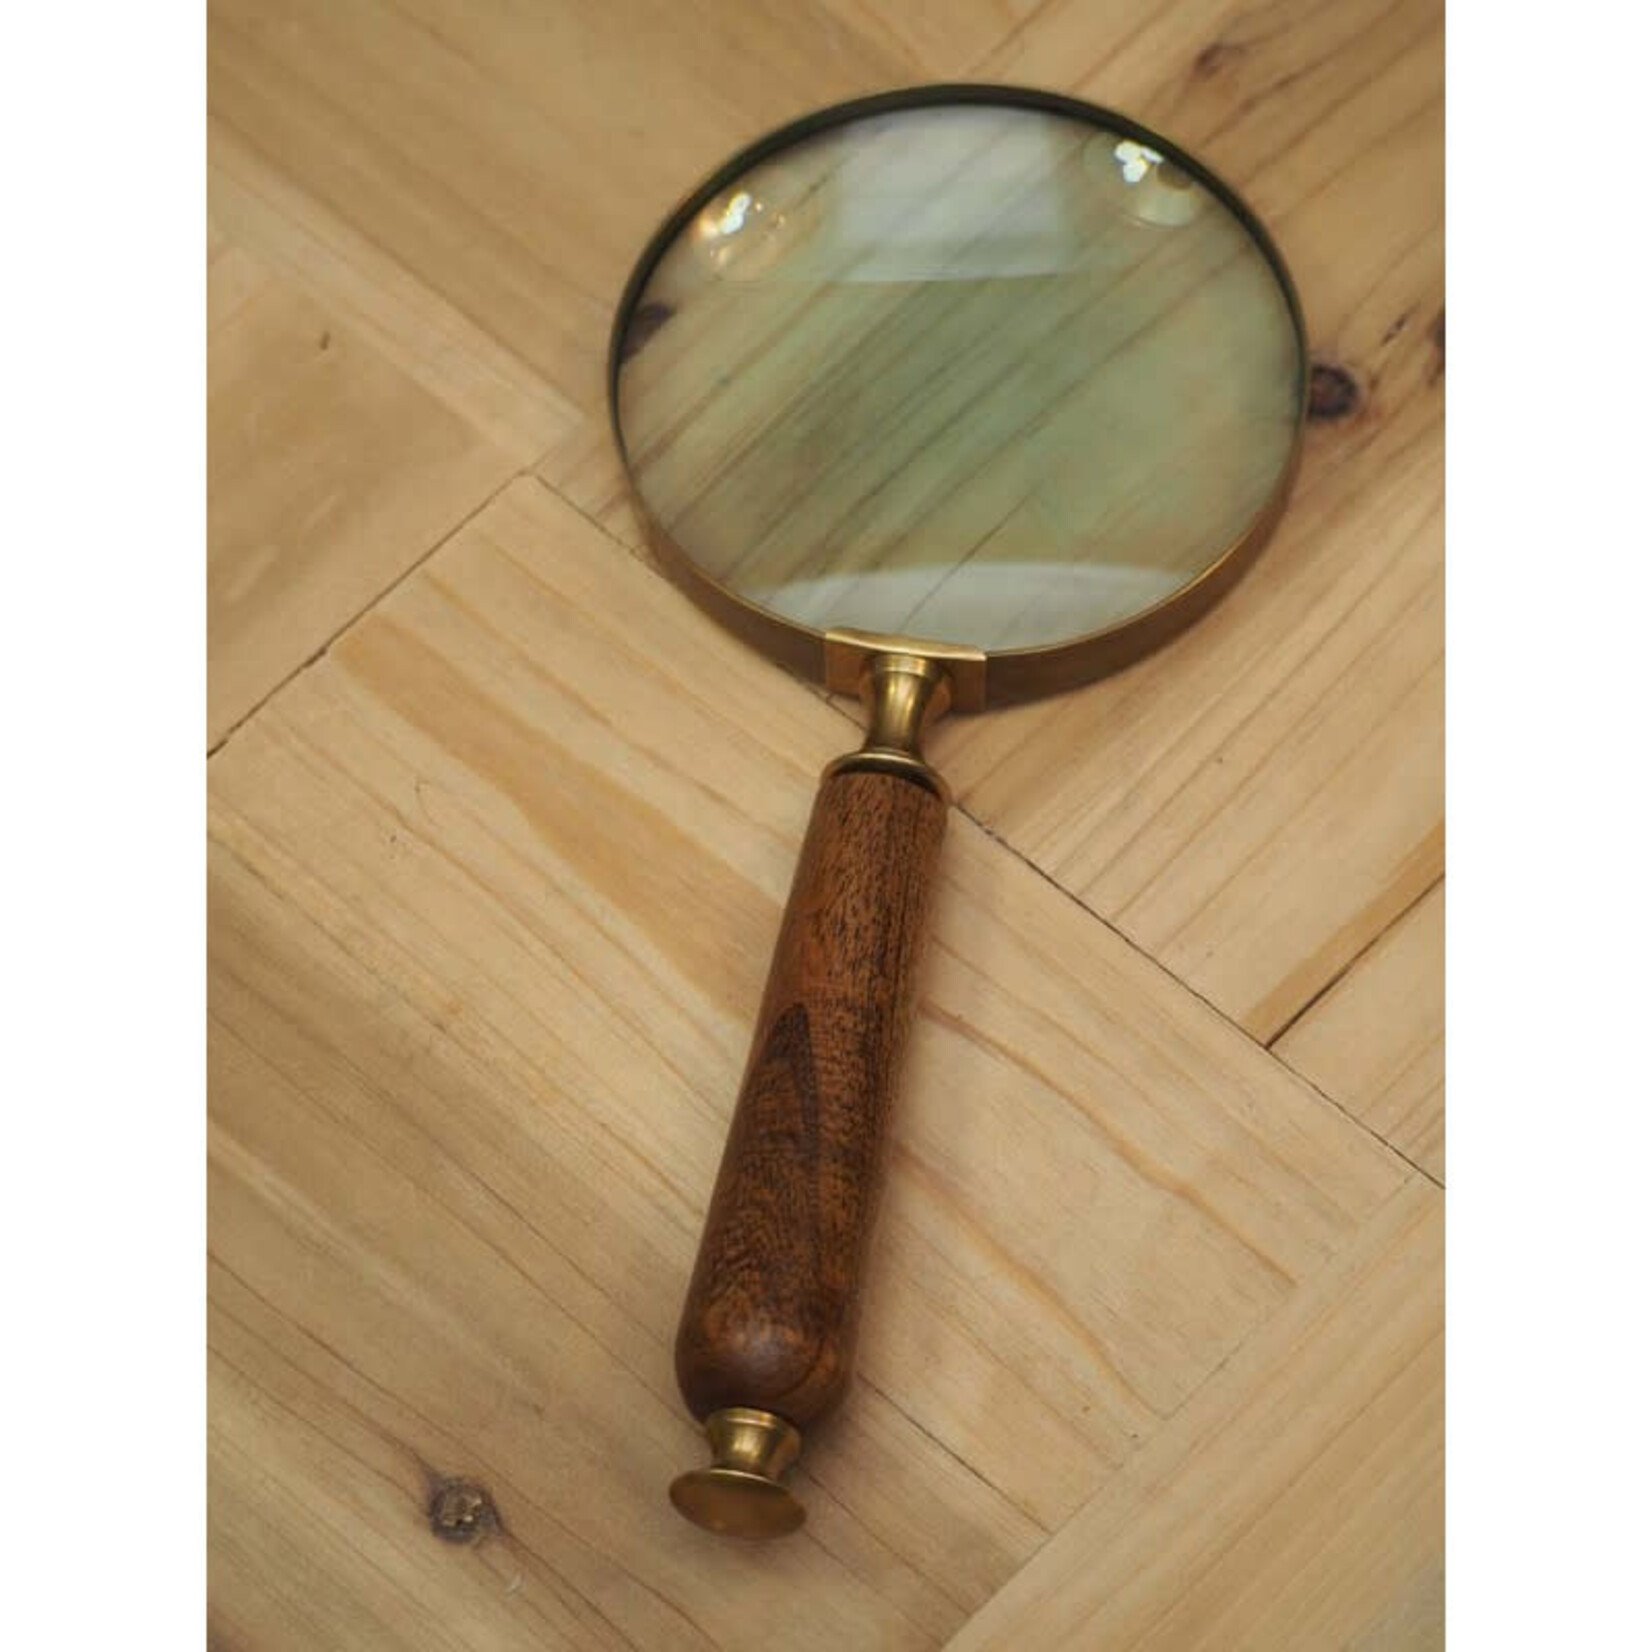 CHEHOMA MAGNIFIER WITH WOODEN HANDLE